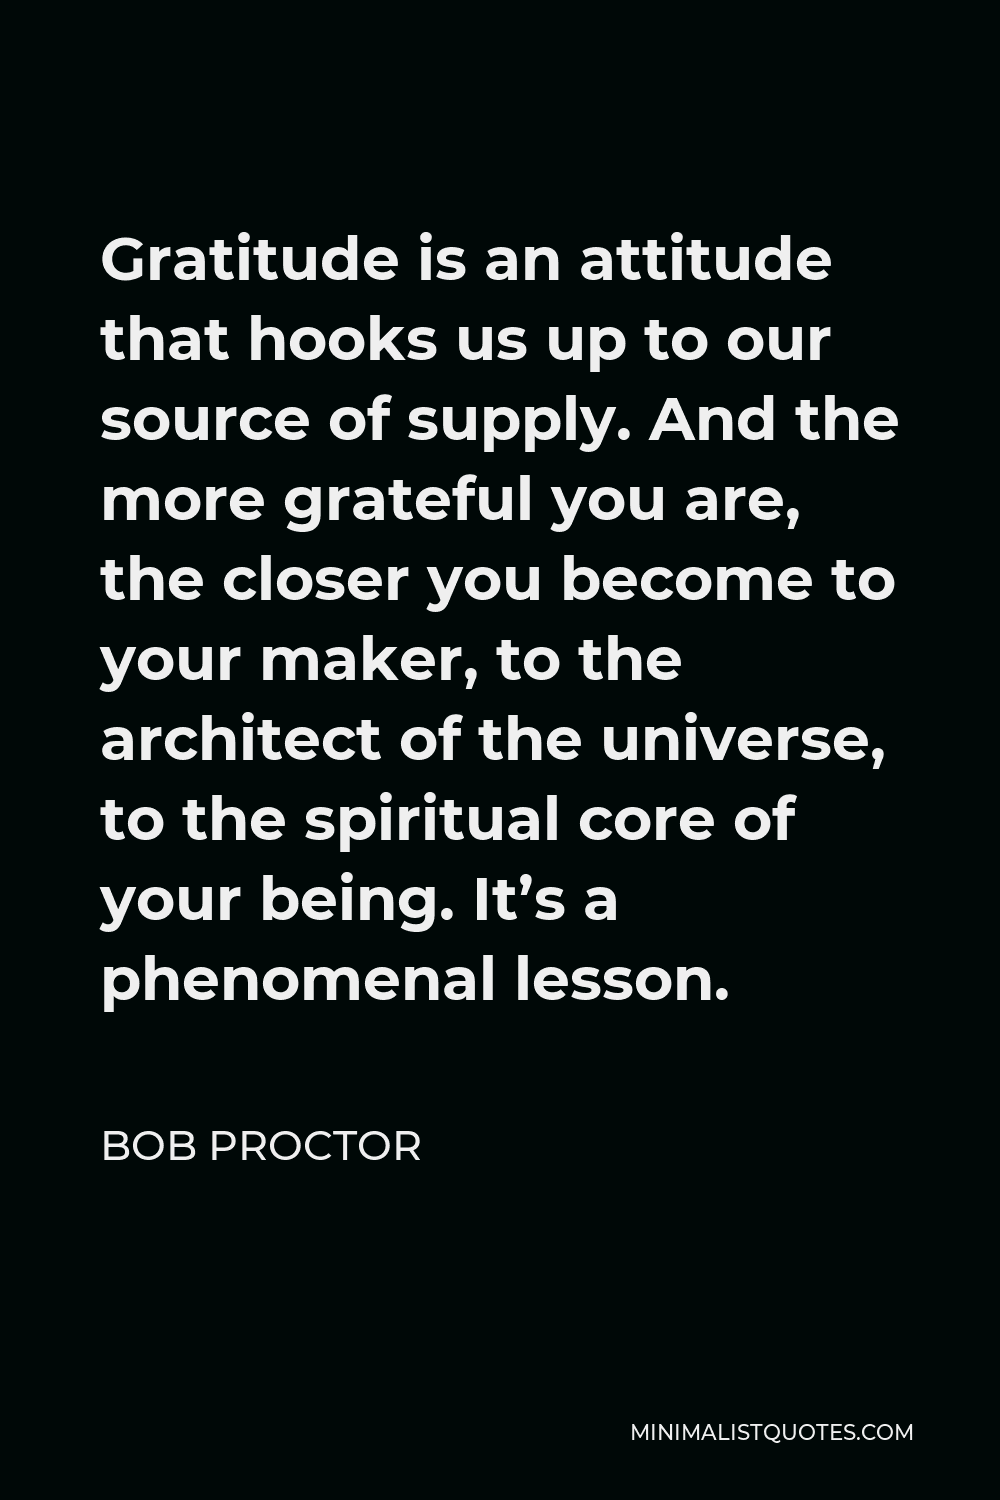 Bob Proctor Quote - Gratitude is an attitude that hooks us up to our source of supply. And the more grateful you are, the closer you become to your maker, to the architect of the universe, to the spiritual core of your being. It’s a phenomenal lesson.